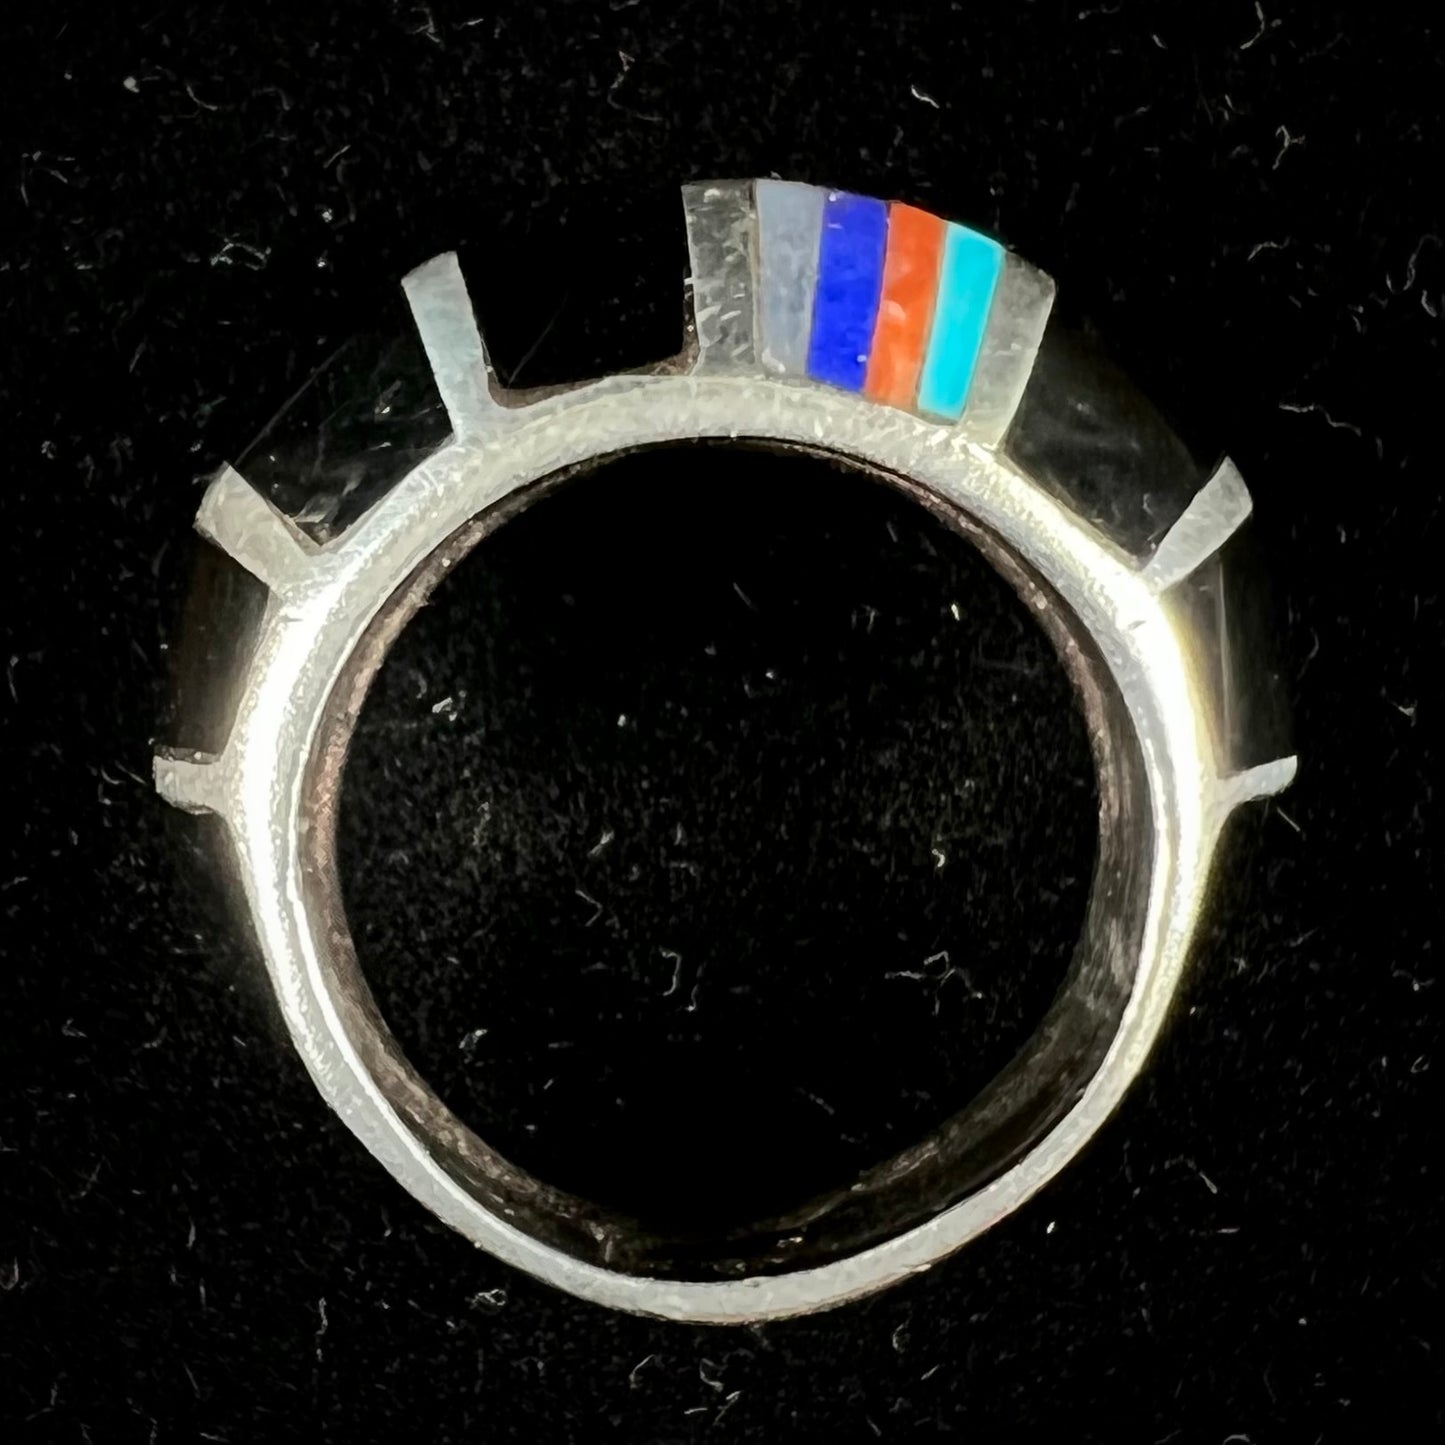 A sterling silver ring inlaid with onyx, turquoise, coral, lapis lazuli, and mother of pearl stones.